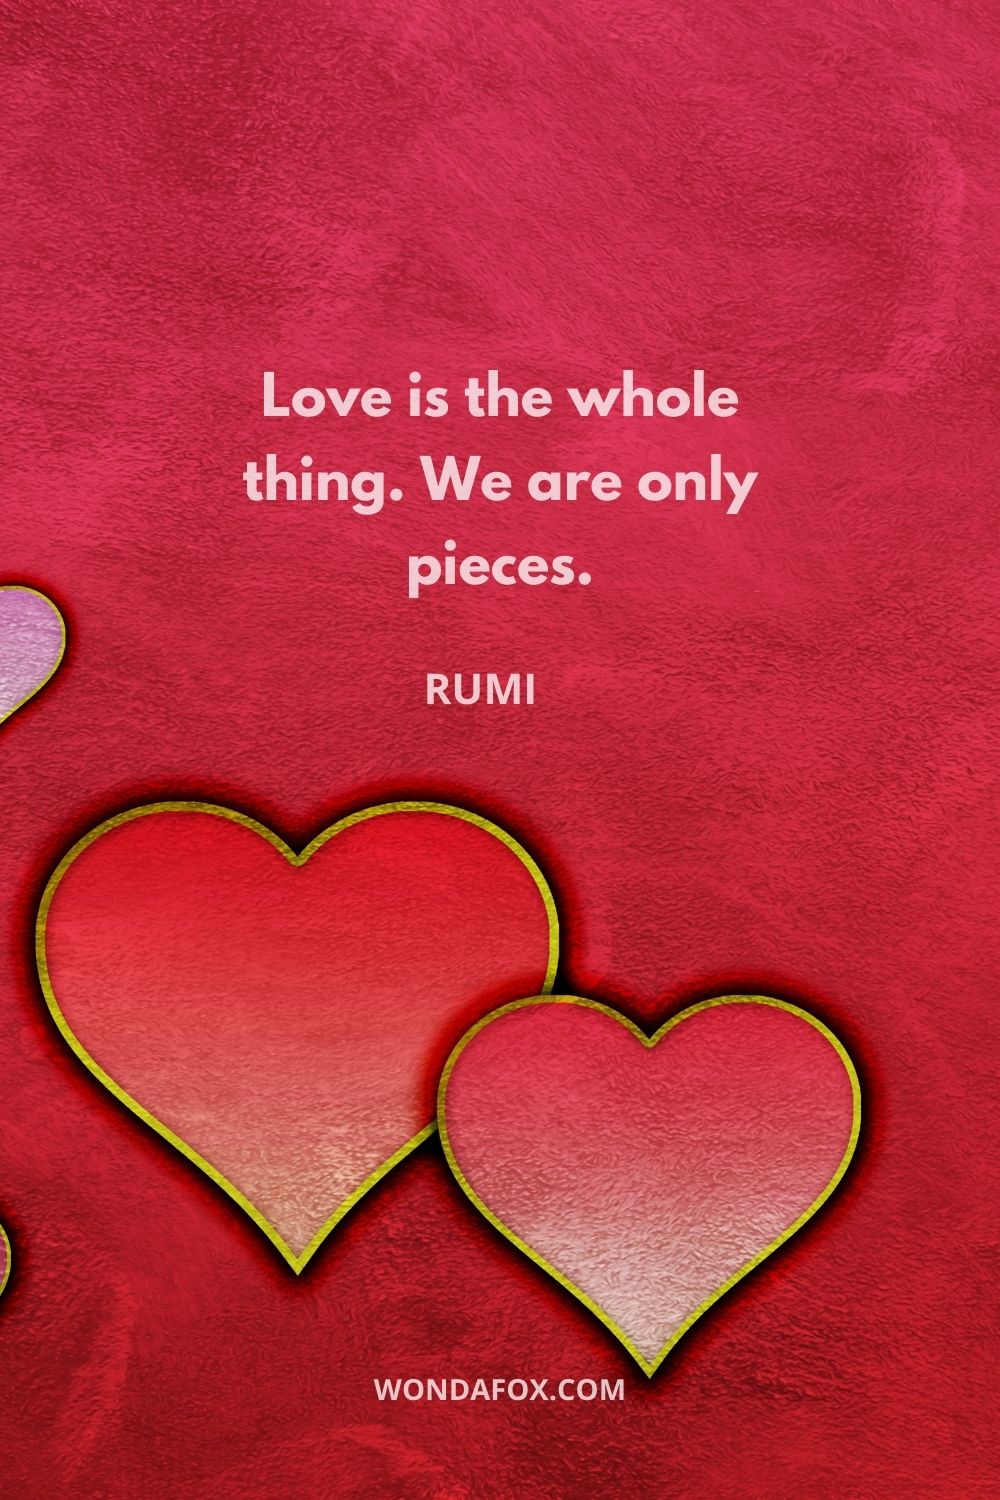 Love is the whole thing. We are only pieces.